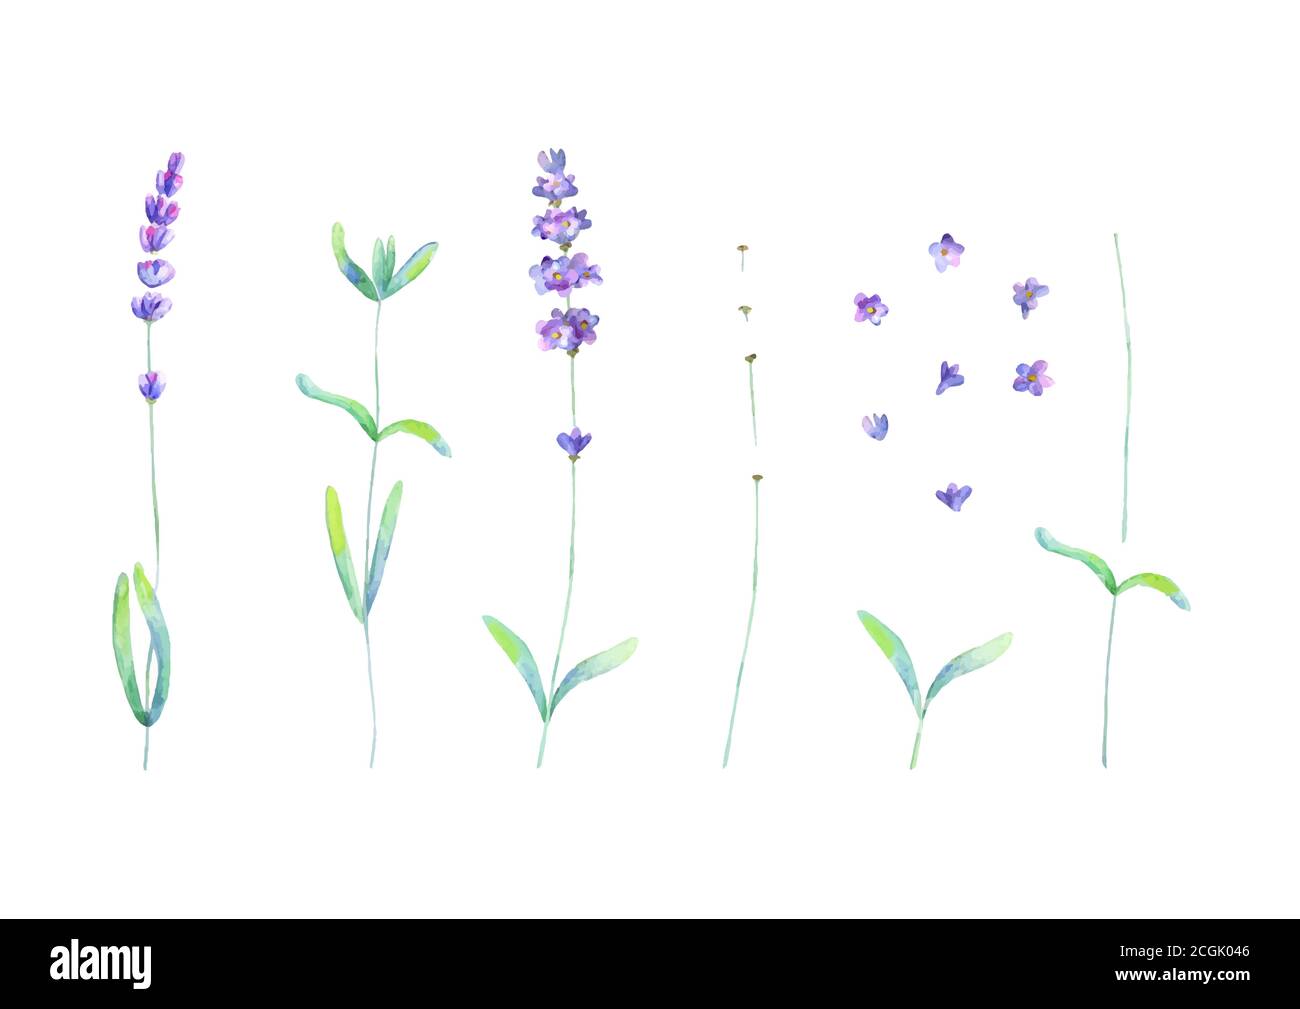 Lavender flowers leaves plants purple green watercolor set isolated on white background. Watercolour hand drawn botanical illustration. Elements for i Stock Vector